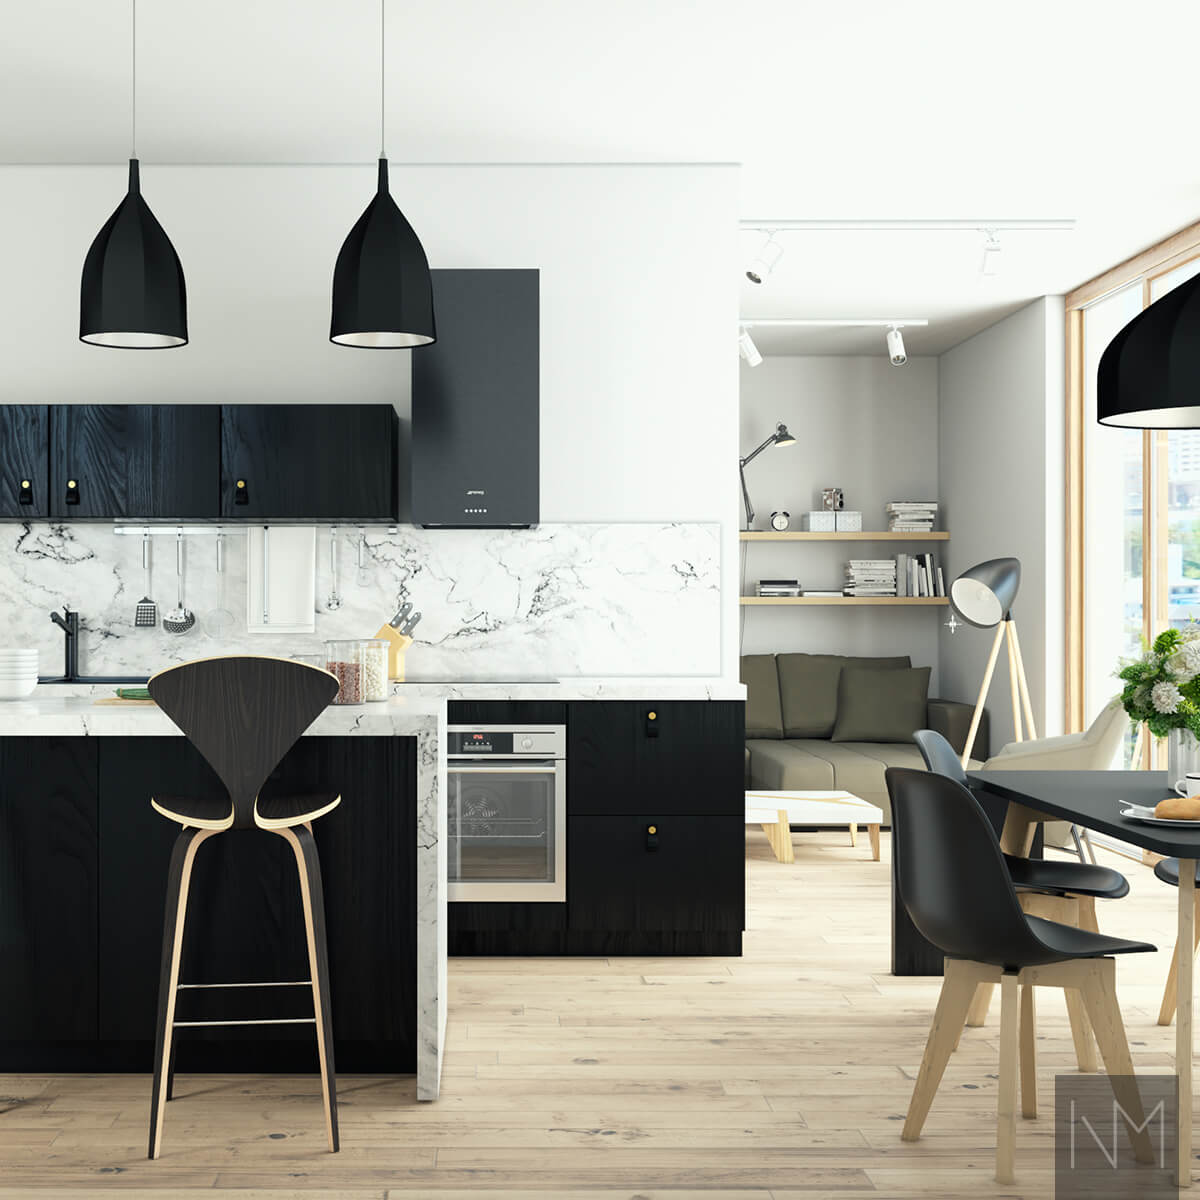 Kitchen doors in Nordic design. Black ash - stained. Handle Loop in black leather with brass button